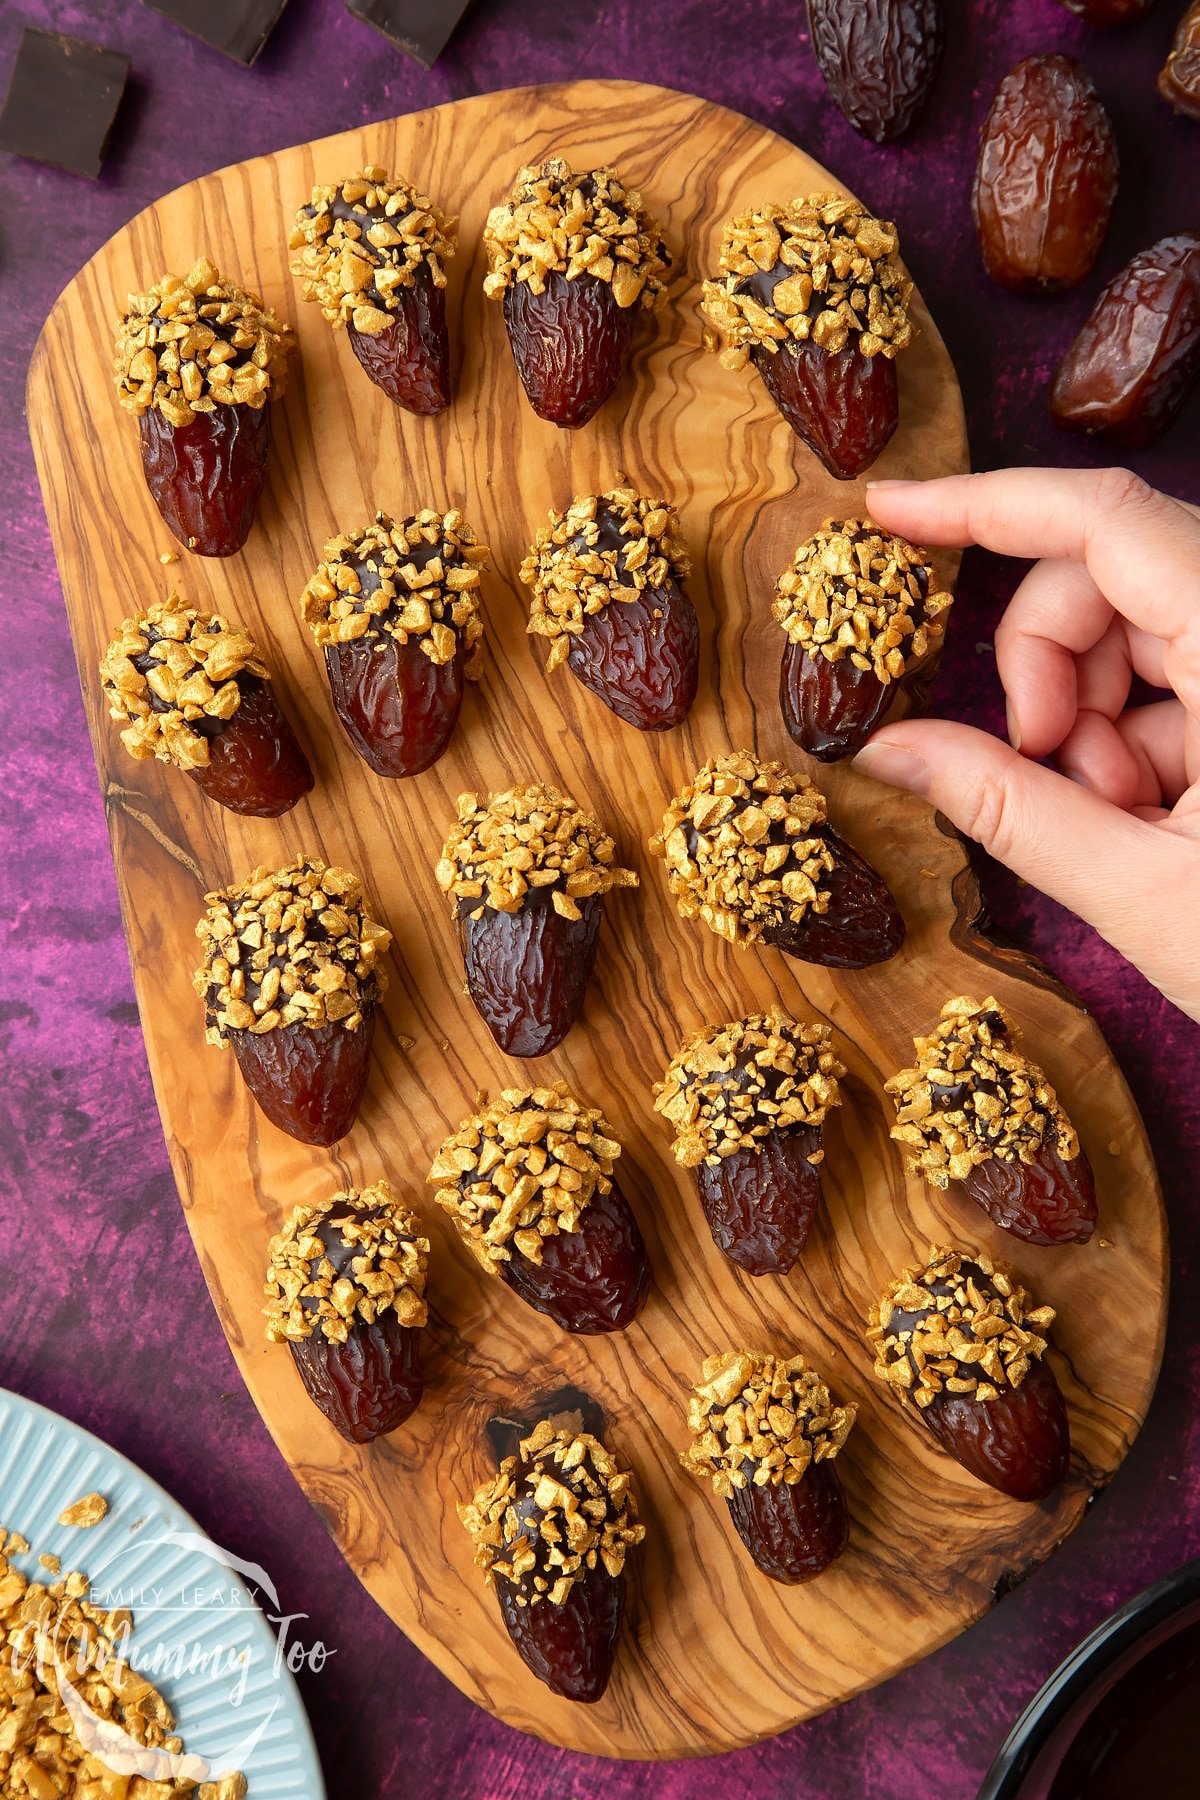 Medjool dates dipped in chocolate. The chocolate dates are on a wooden board and have be studded with gold chopped nuts. Nuts and chocolate surround the board. A hand reaches to take a date.